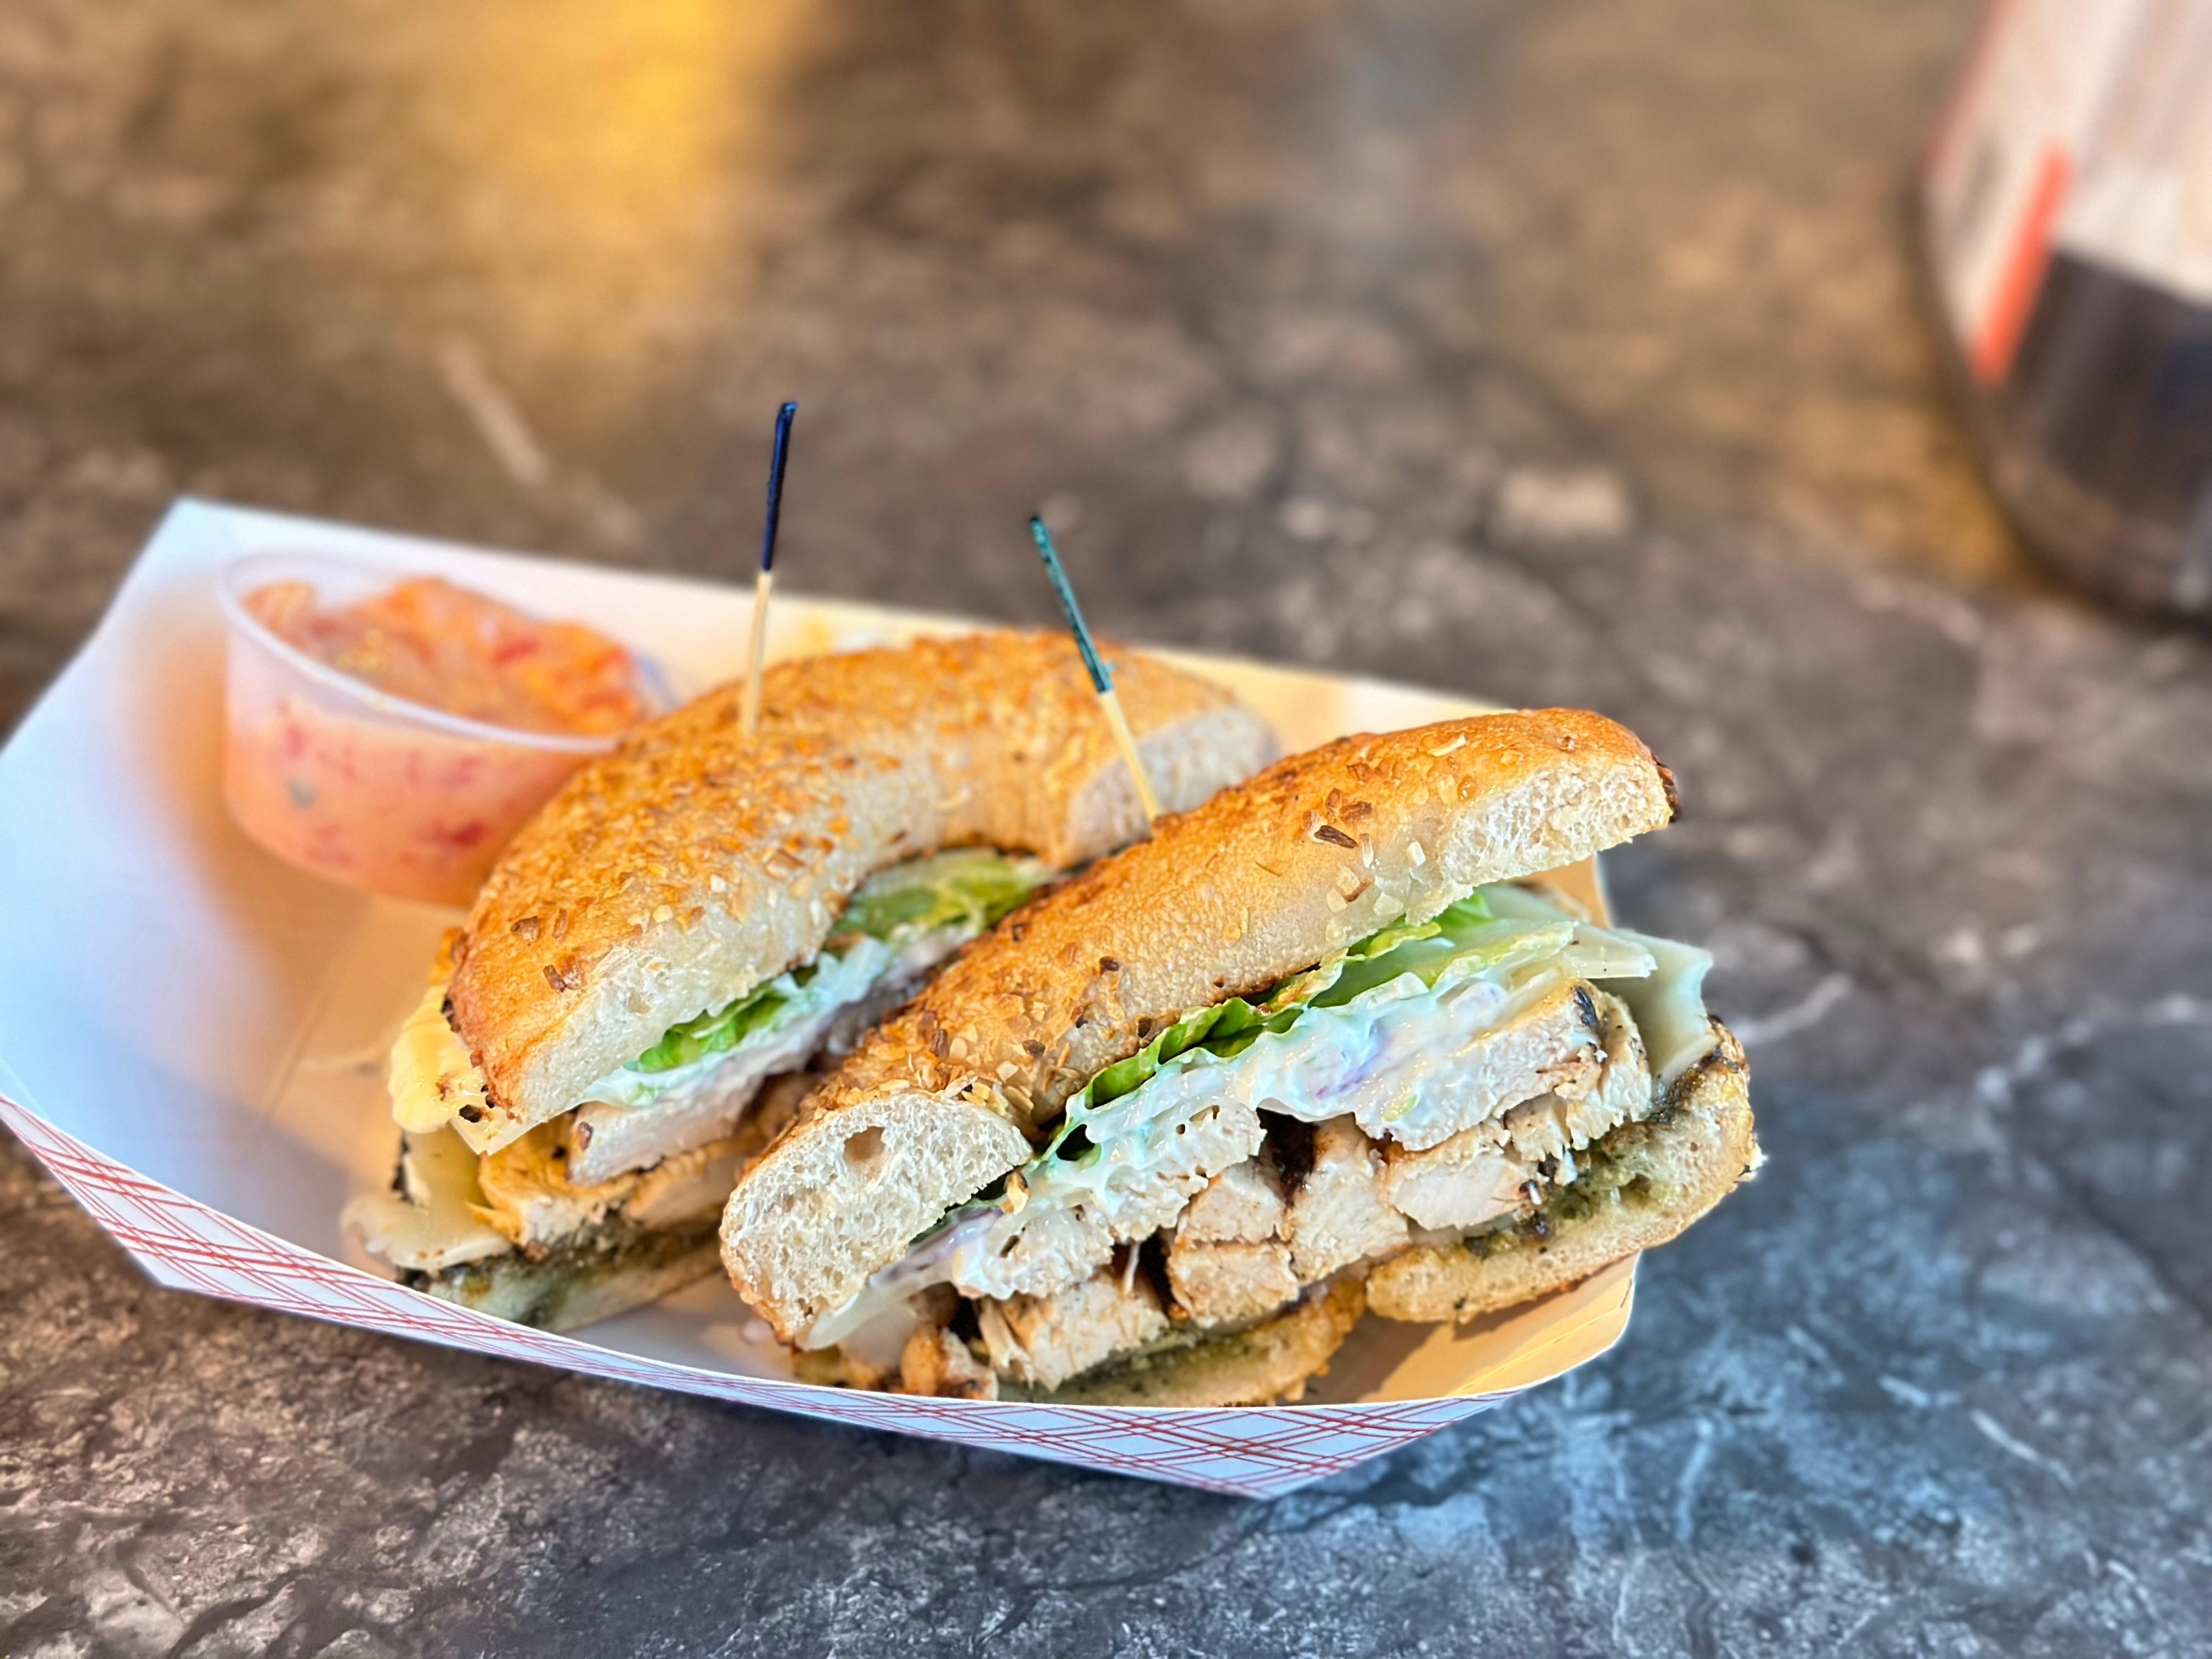 CHICKEN PESTO PROVOLONE BAGEL (grilled chicken, provolone, pesto aioli, onions and lettuce on any choice of bagel)